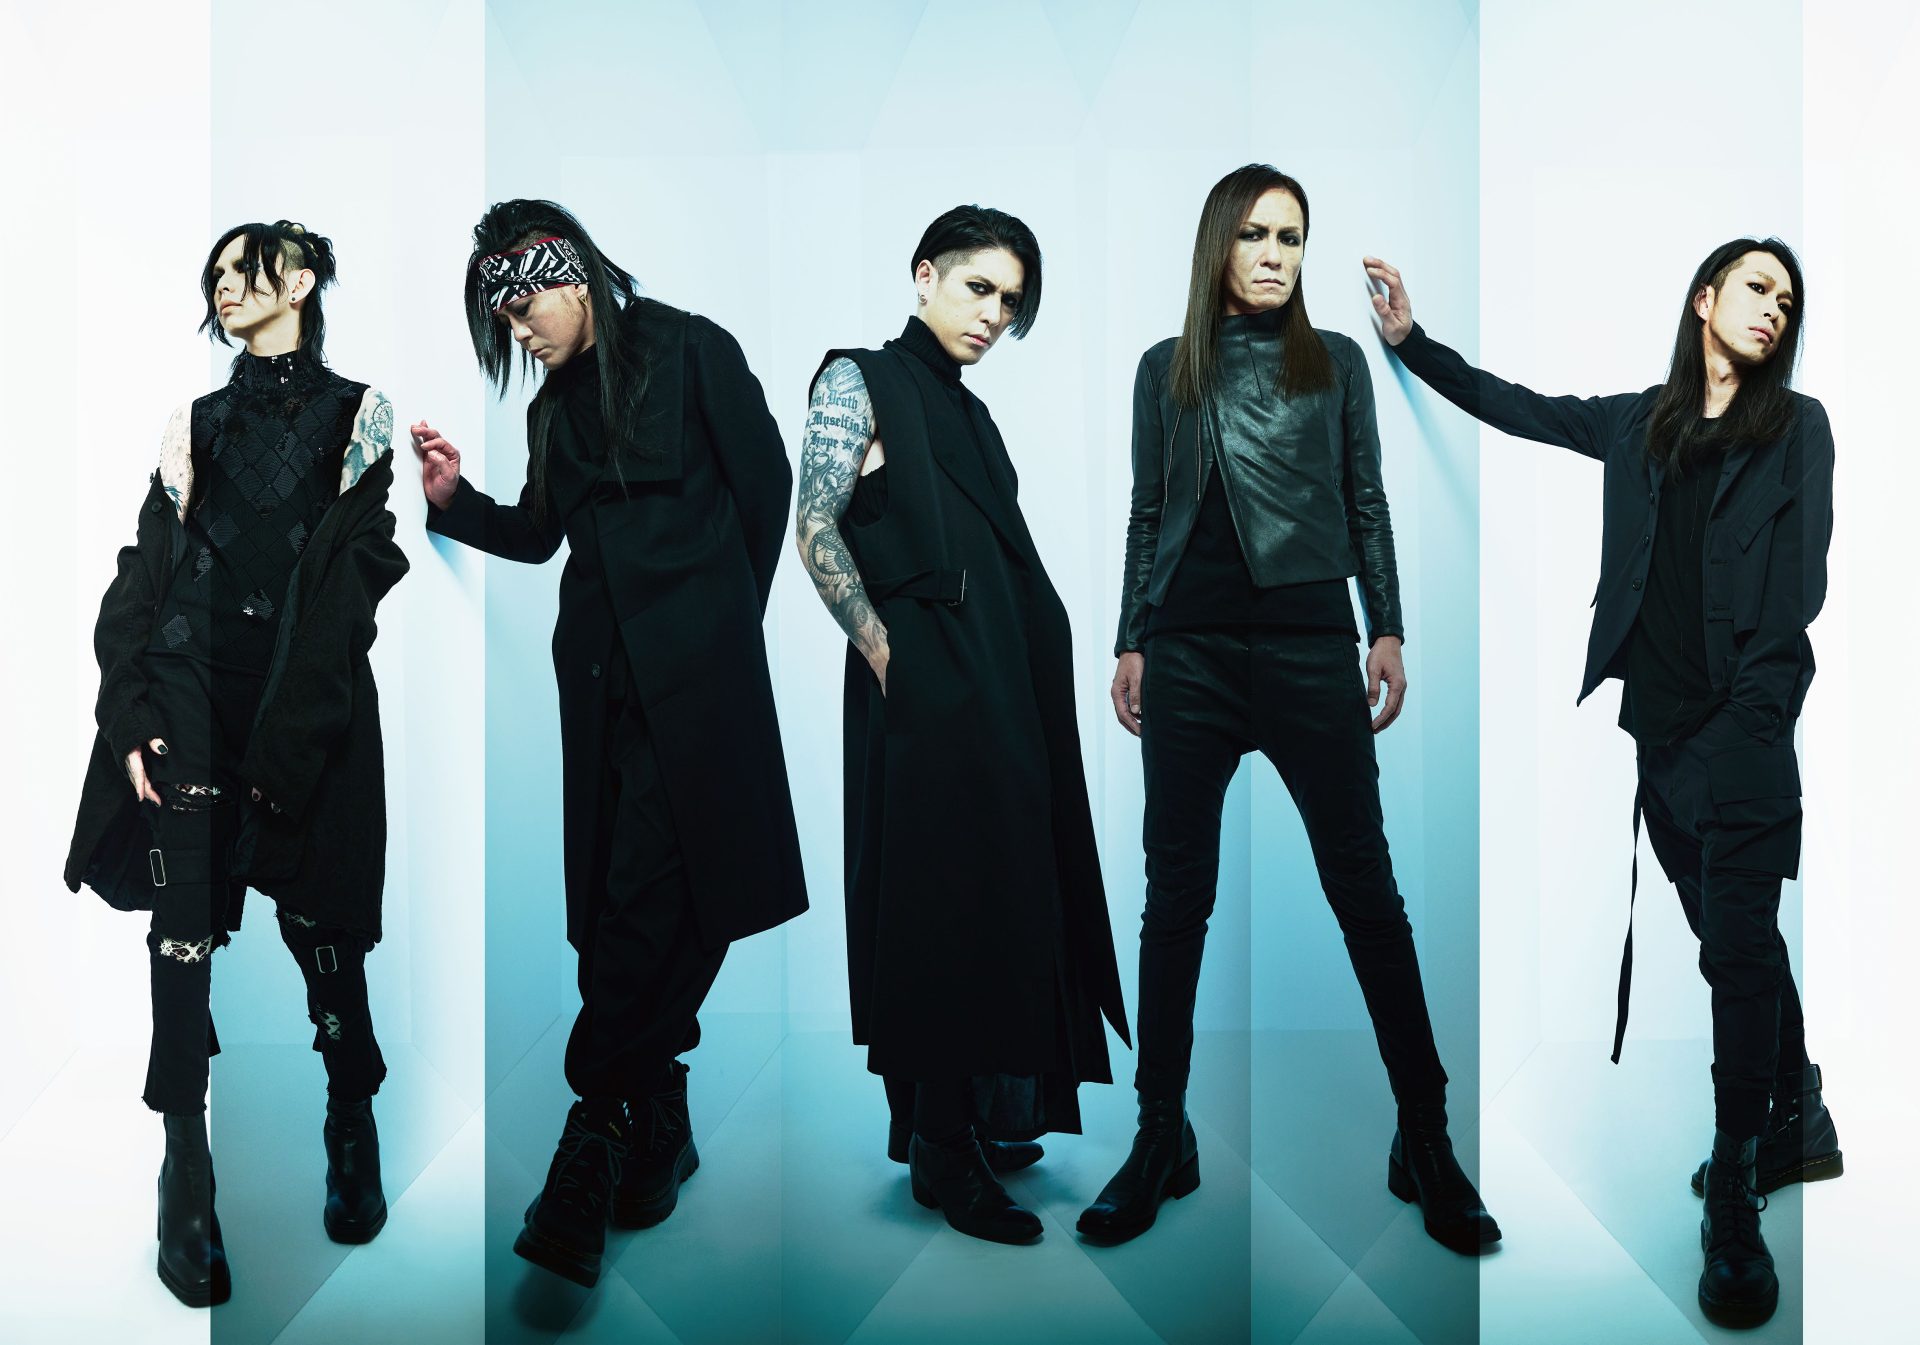 lynch.、日本武道館ライブBlu-ray＆DVD「THE FATAL HOUR HAS COME AT 日本武道館」を本日リリース！